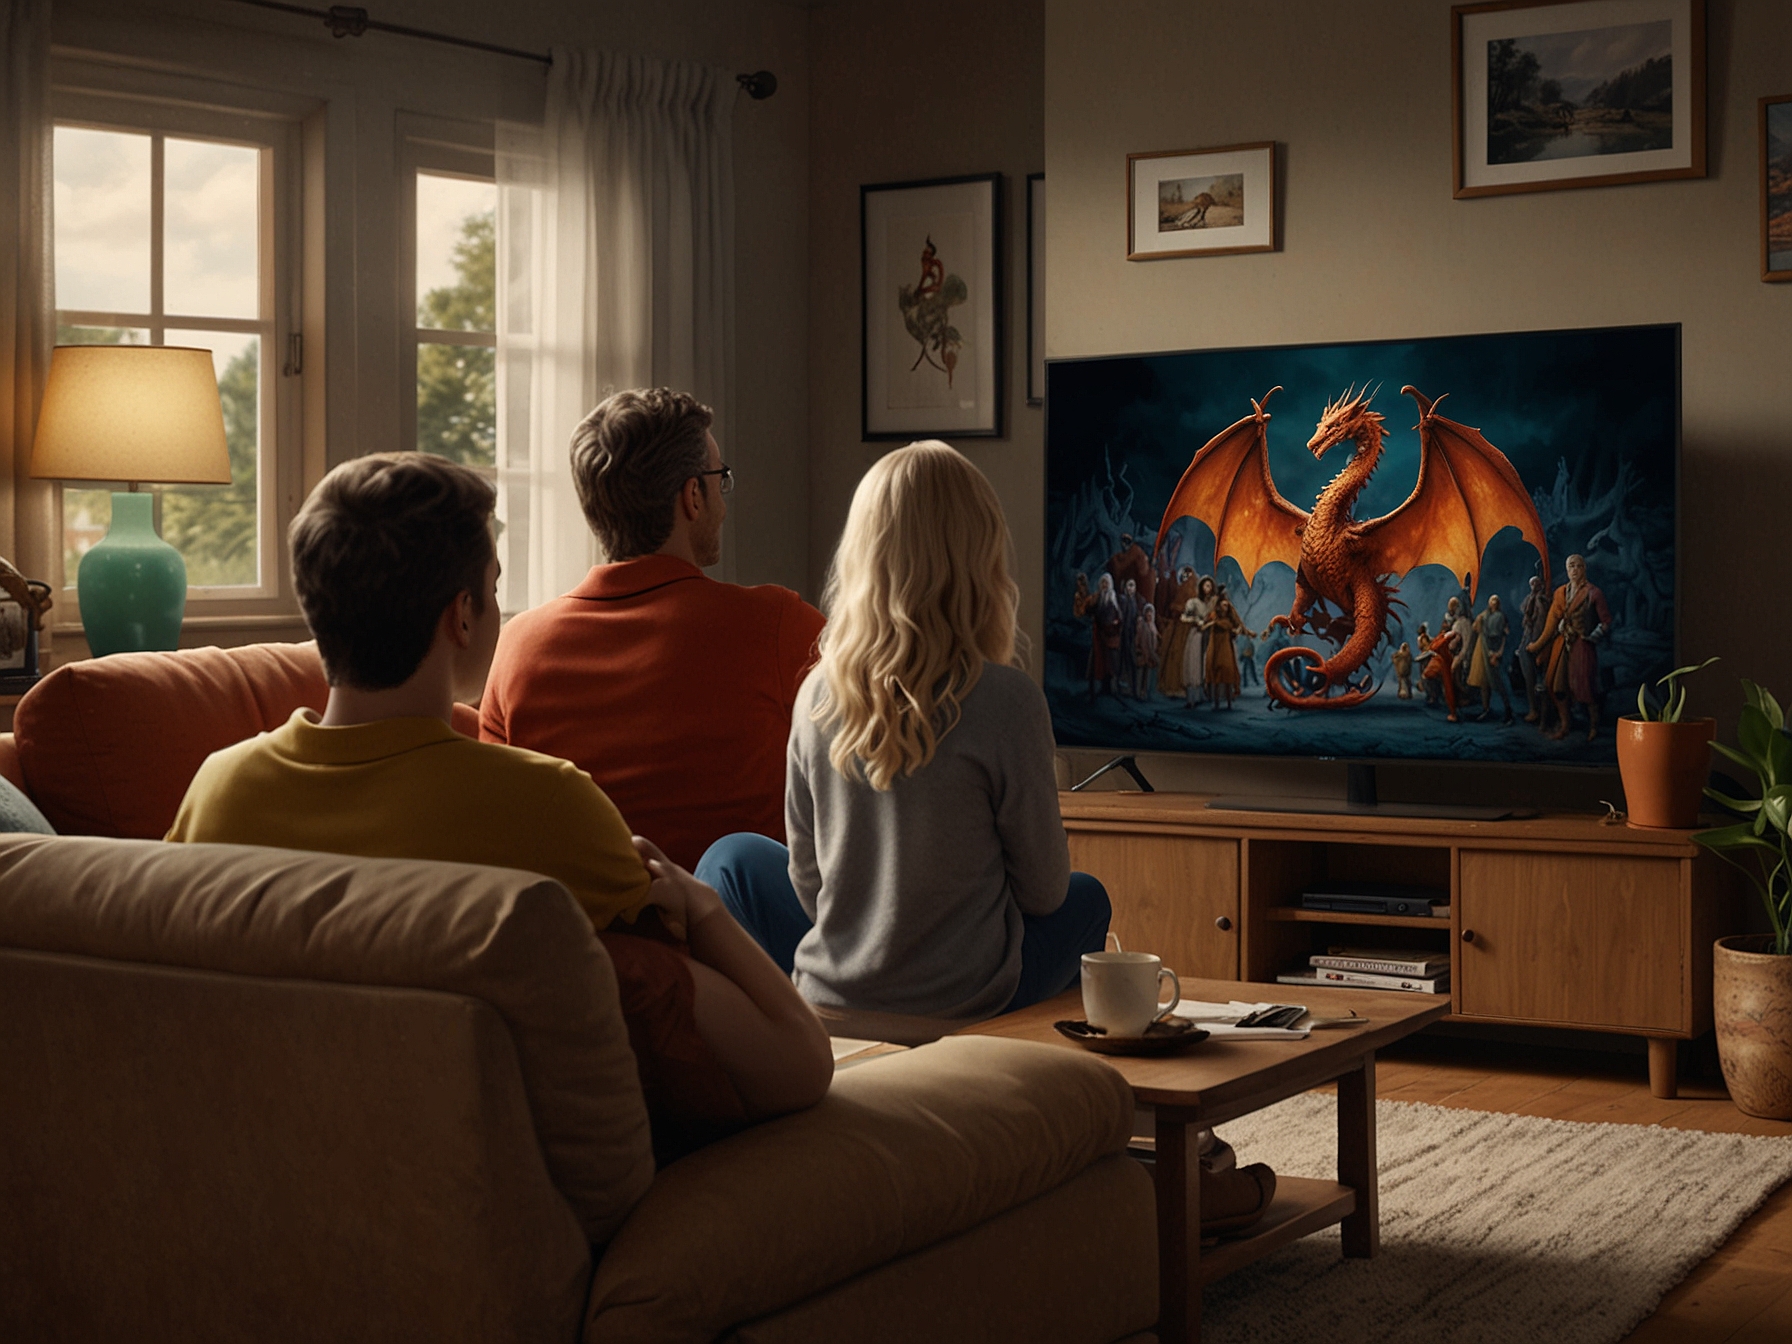 A family gathered around a TV watching 'House of the Dragon' season 2 streaming on HBO Max, symbolizing global accessibility for fans through various platforms.